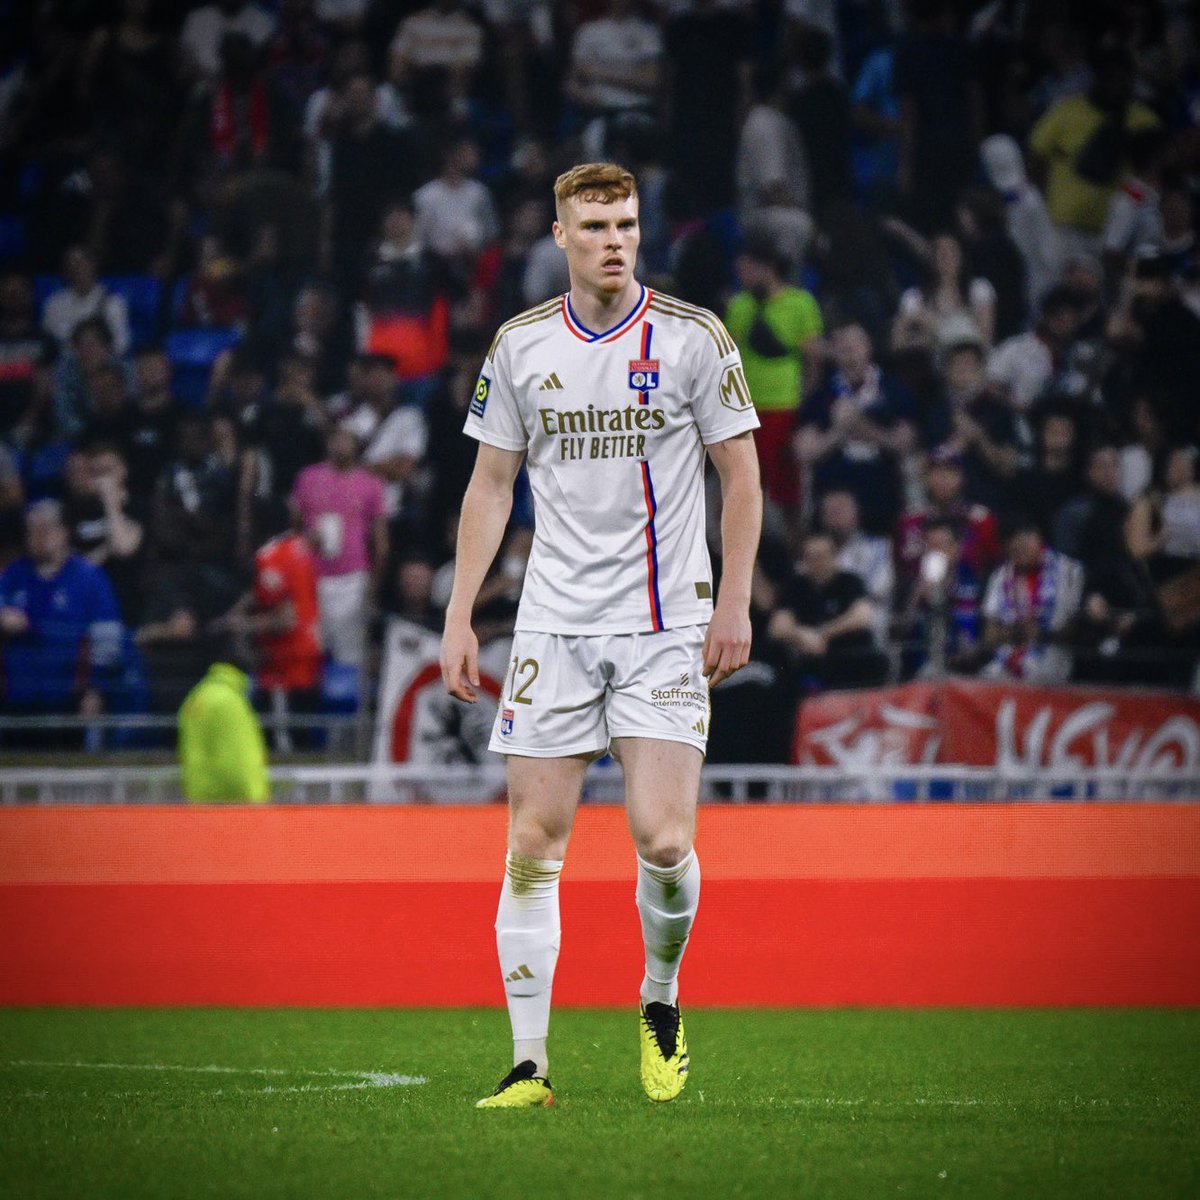 Lyon are playing away vs PSG tonight You’d have to feel sorry for Kylian Mbappe having to come up against Ireland’s Jake O’Brien Best of luck OL 🇮🇪🇫🇷